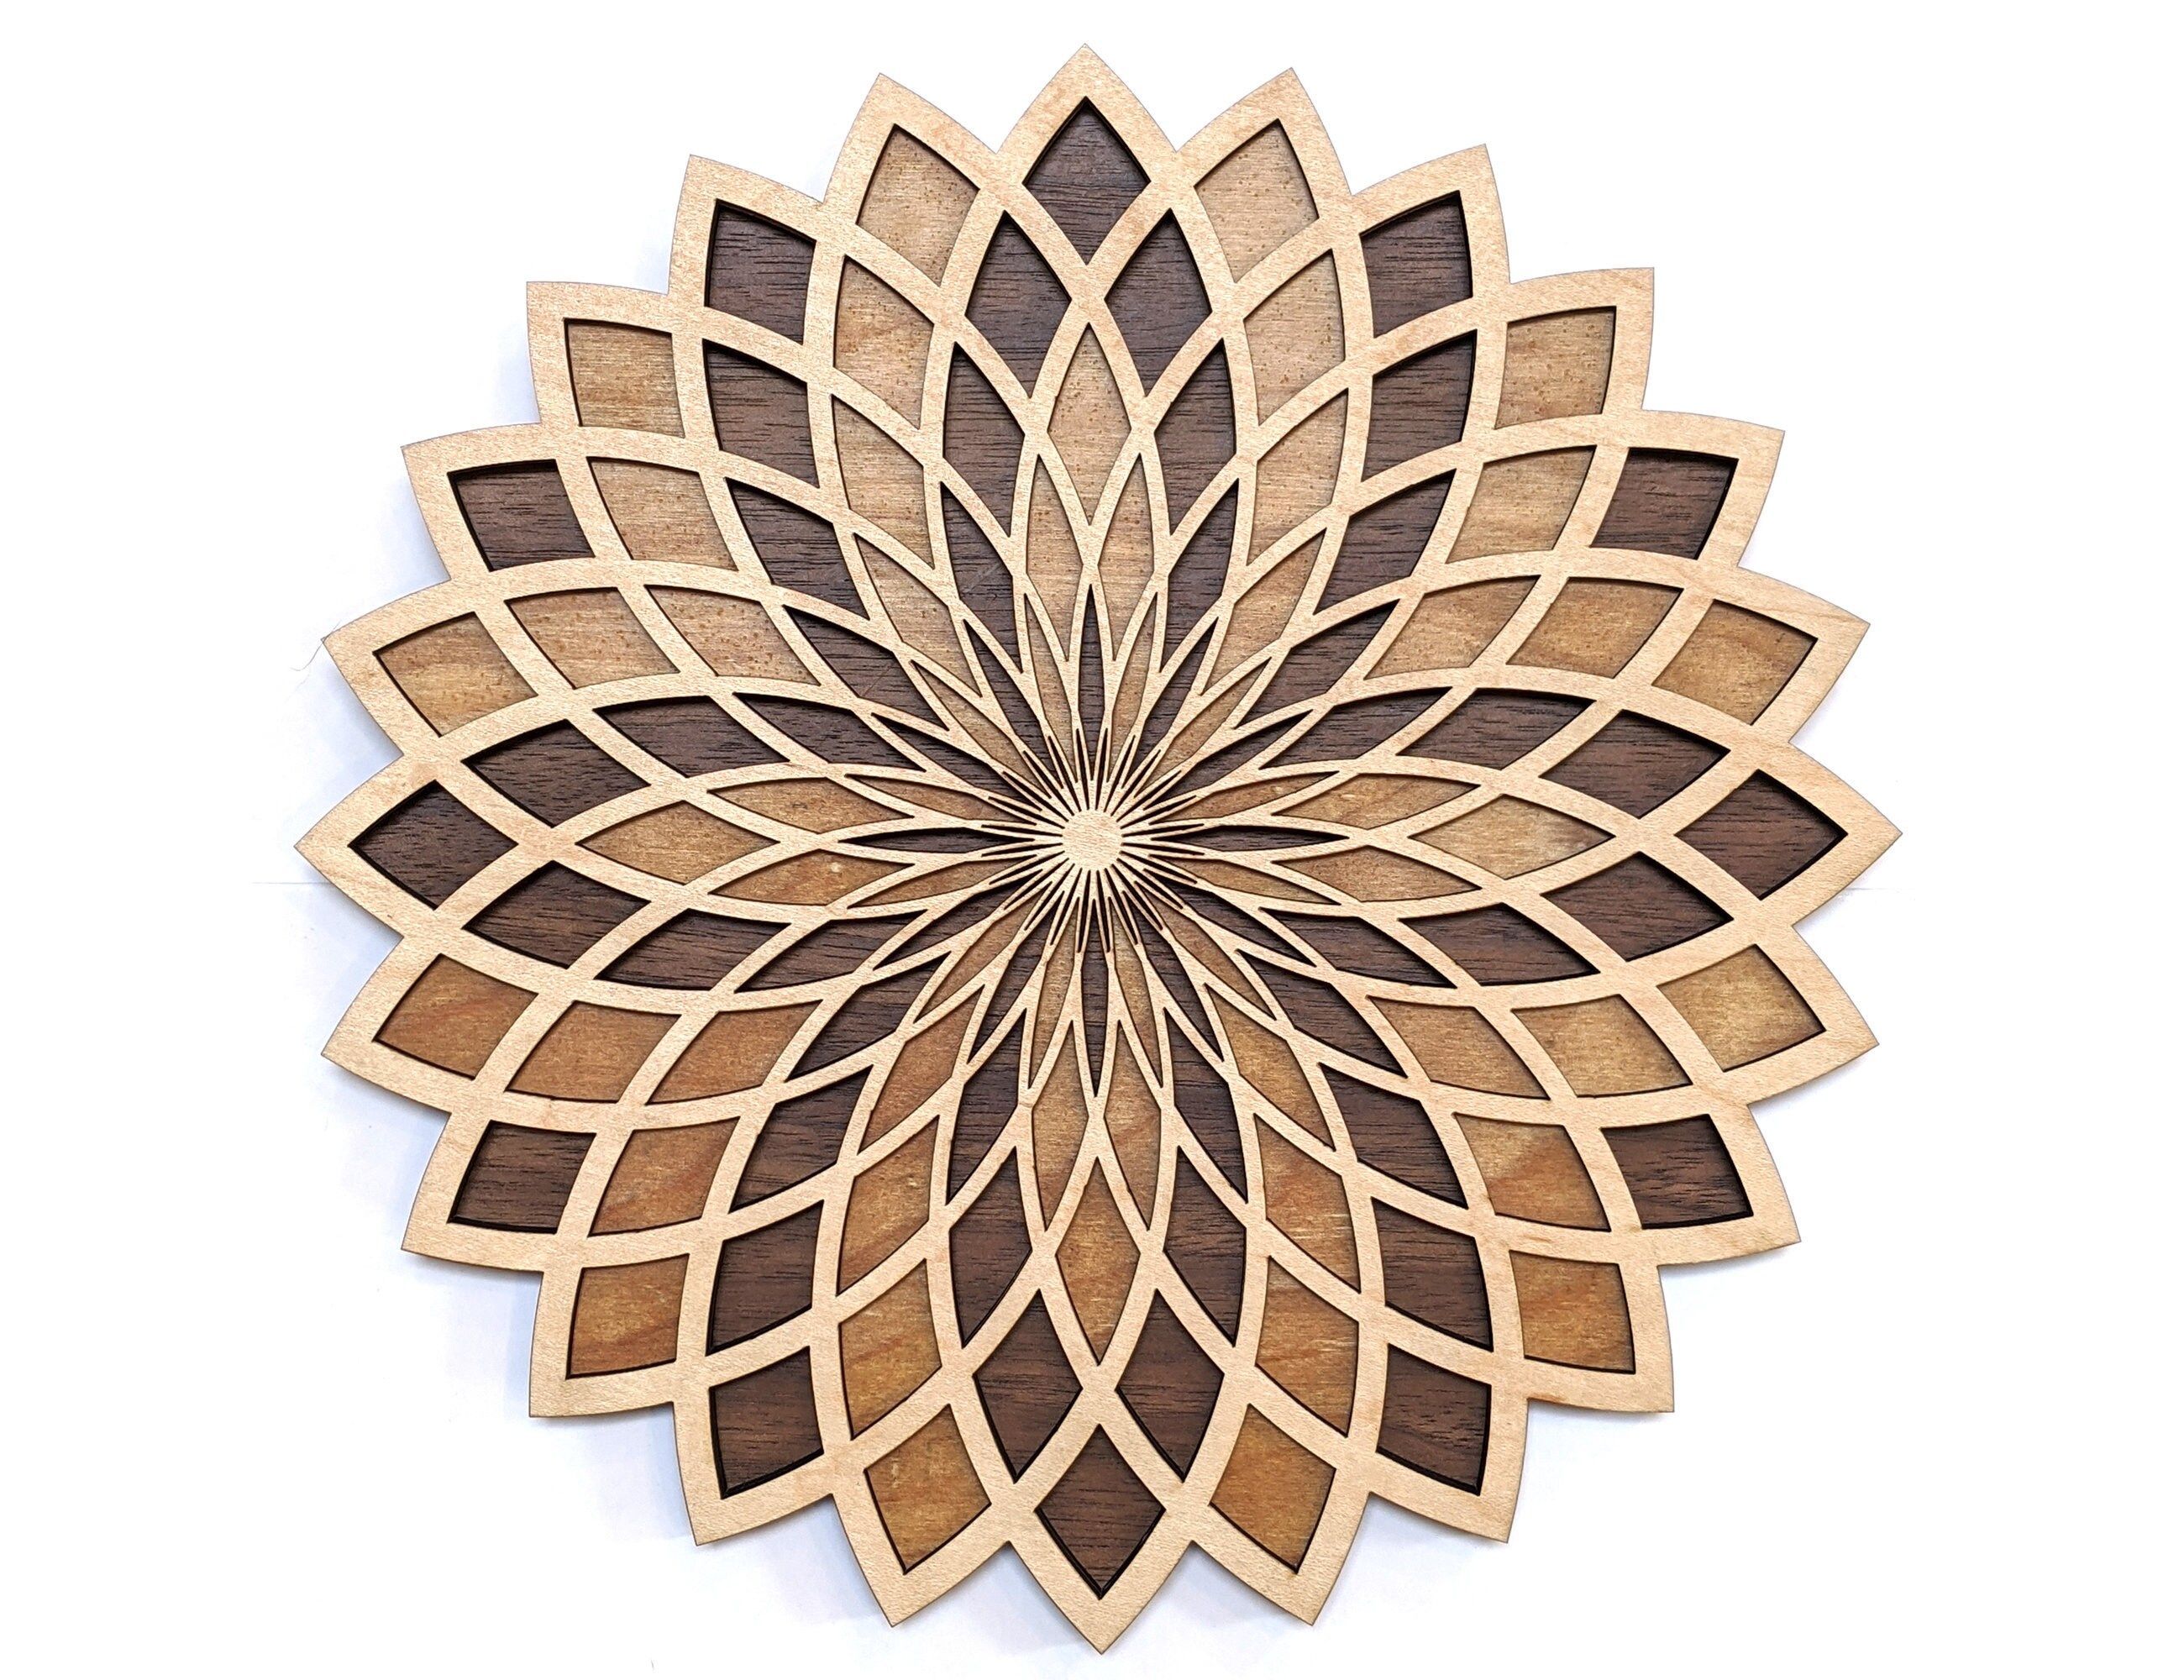 Torus Flower 3 Layer 18 22 Wood Wall Art Wooden Living – Etsy Inside 3 Layers Wall Sculptures (View 3 of 15)